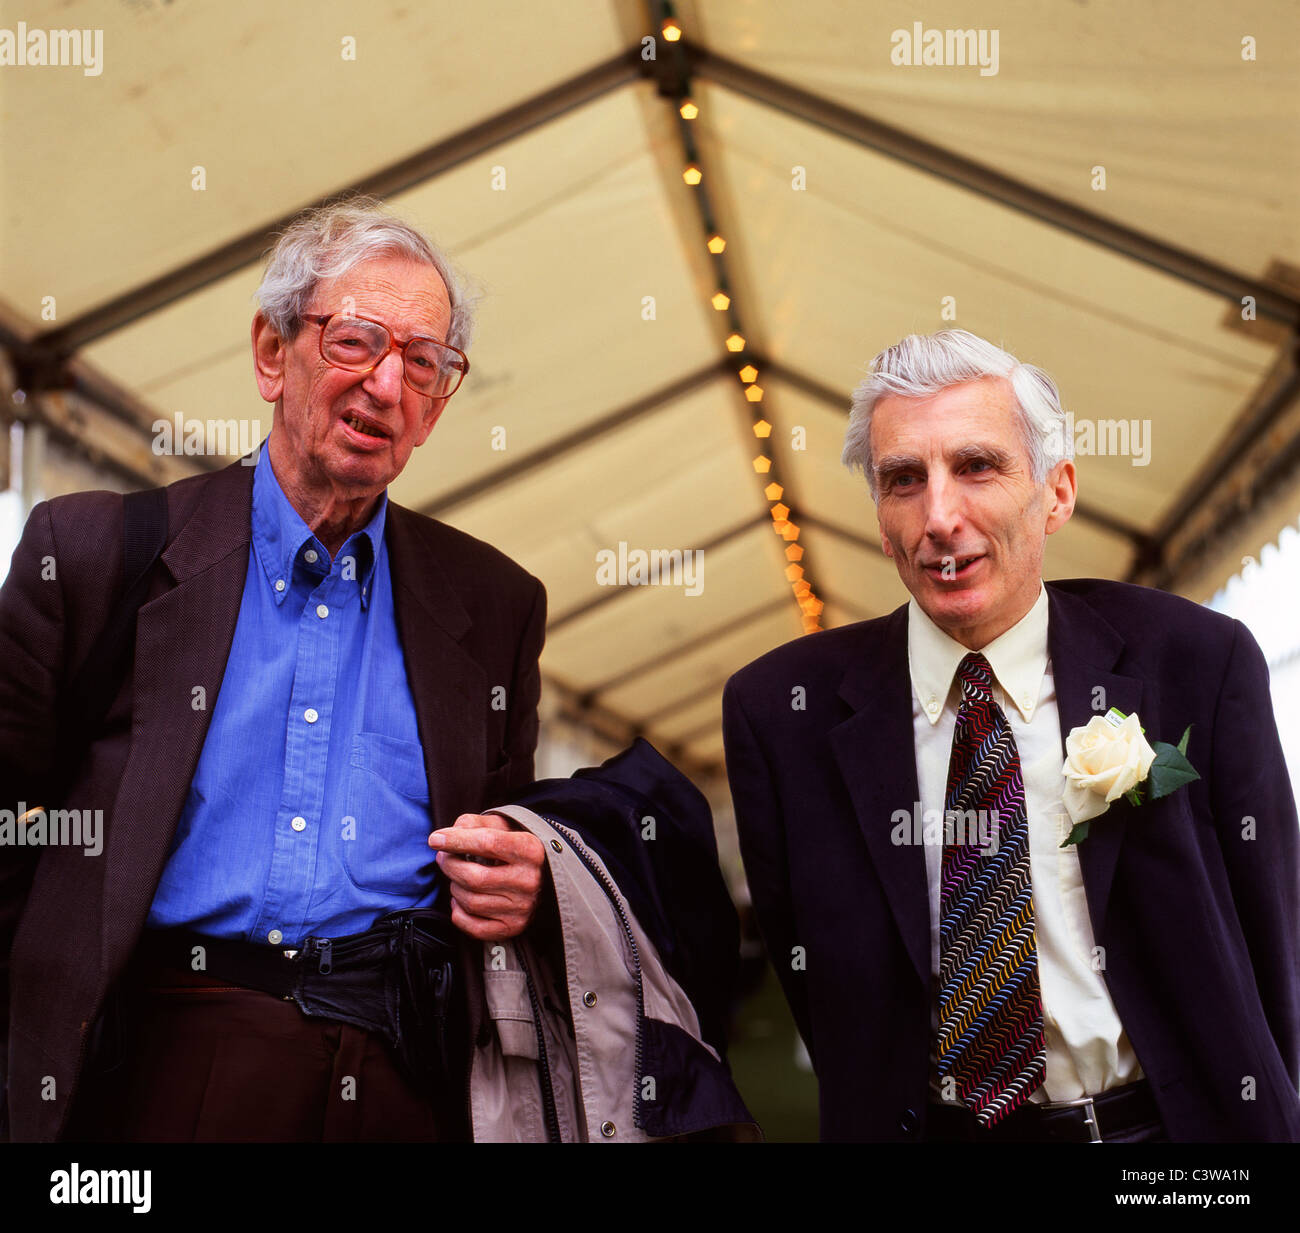 Eric Hobsbawm historian l. and Astronomer Royal Sir Martin Rees r. at the 2003 Hay Literature Festival in Hay-on-Wye Wales UK KATHY DEWITT Stock Photo